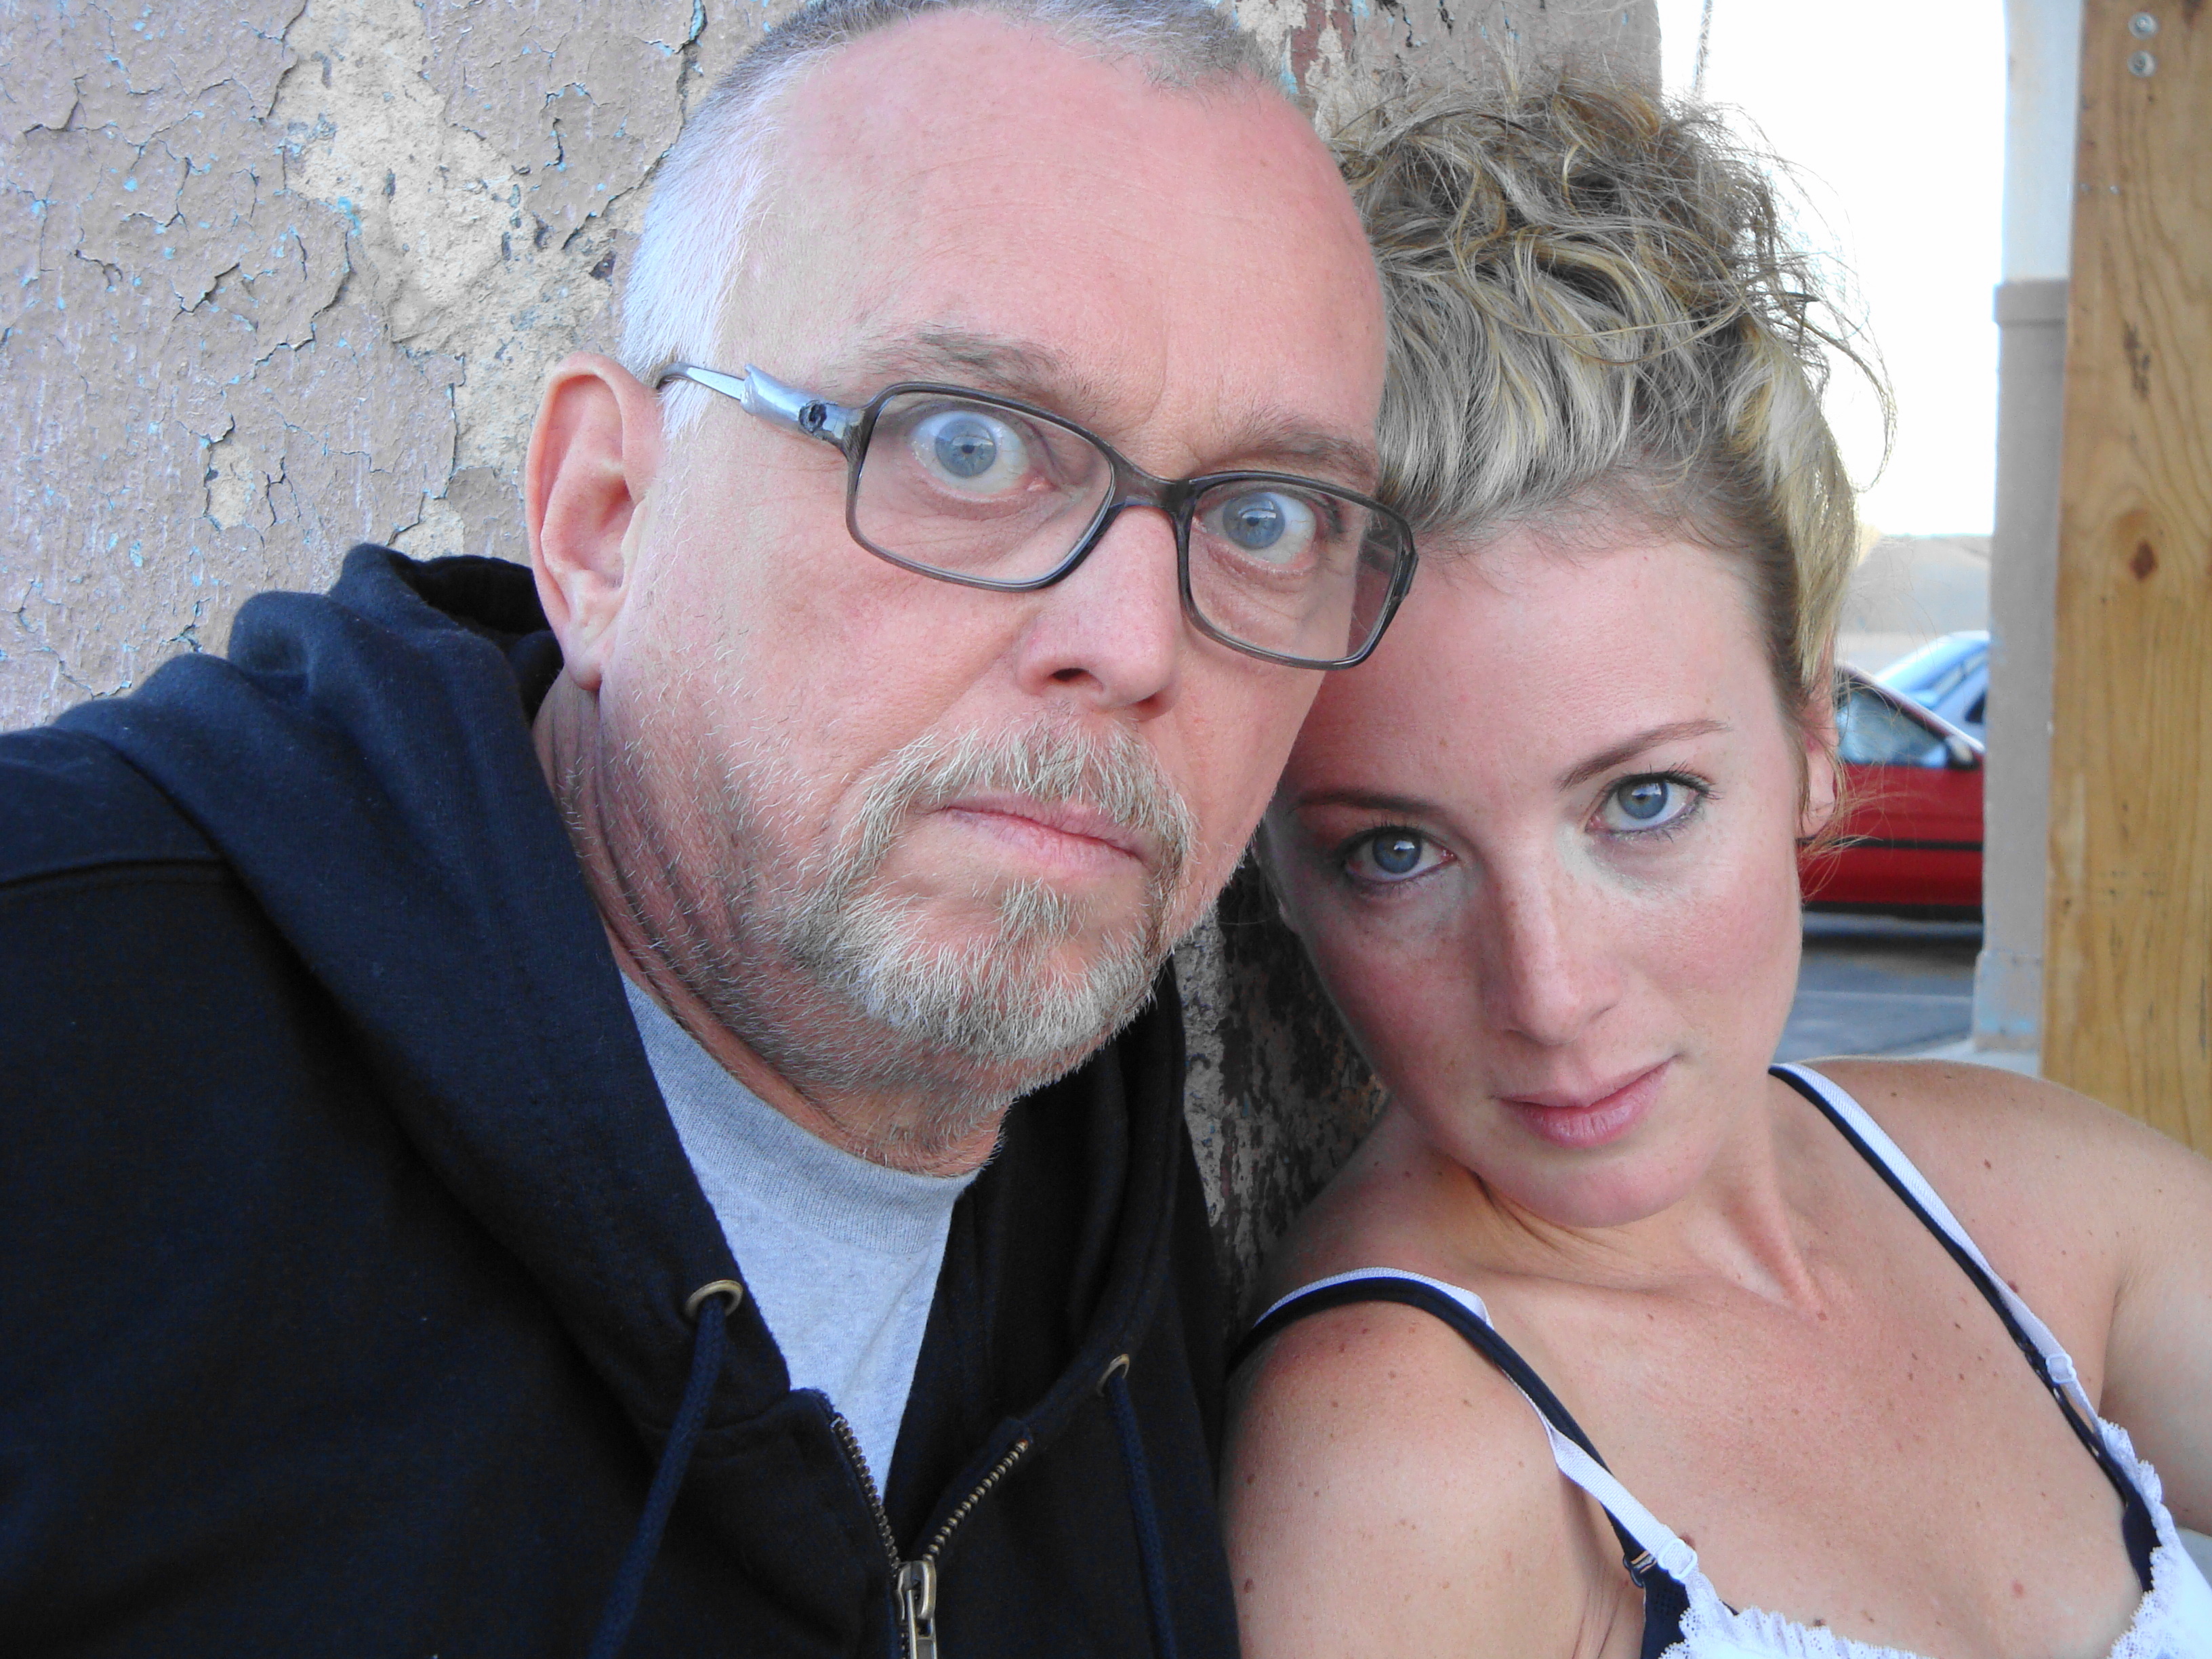 Actor Anthony Hornus (Dean Teaster's Ghost Town, Wild Michigan, An Ordinary Killer) in character as ex-con Donald Martin, with actress Tracilyn Jones (A State of Hate, One Long Day) on the set of Renovation in Yuma, Ariz.